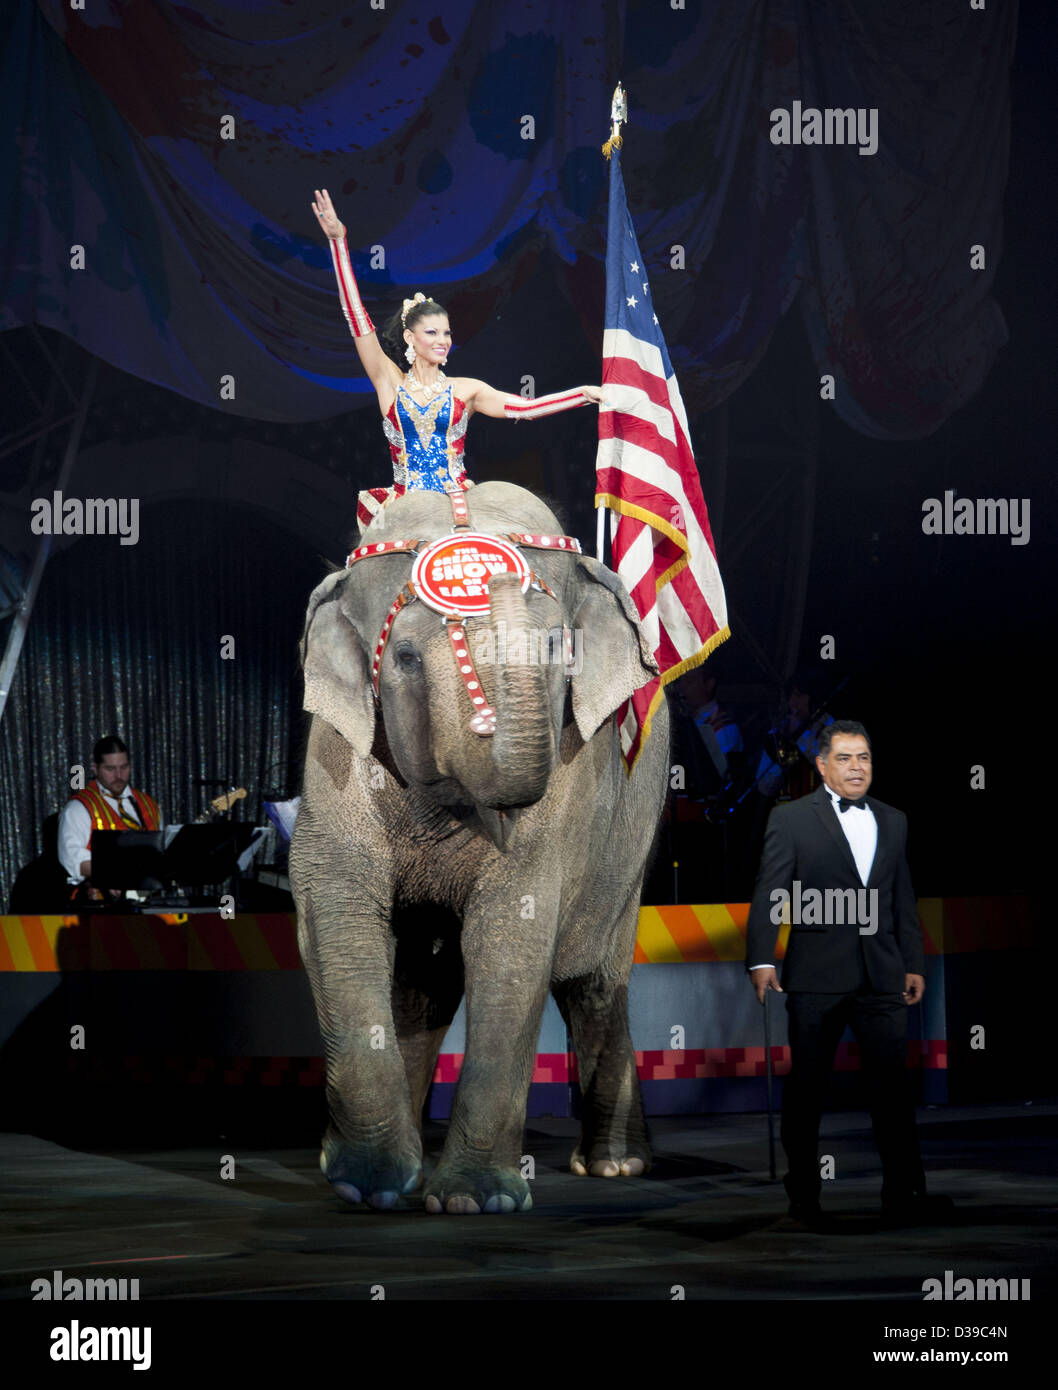 Philadelphia, Pennsylvania, USA. 13th February 2013. A circus performer, during 'The Greatest Show On Earth' , Ringling Bros, Barnum and Bailey circus which was held at the Wells Fargo Center in Philadelphia (Credit Image: Credit:  Ricky Fitchett/ZUMAPRESS.com/Alamy Live News) Stock Photo